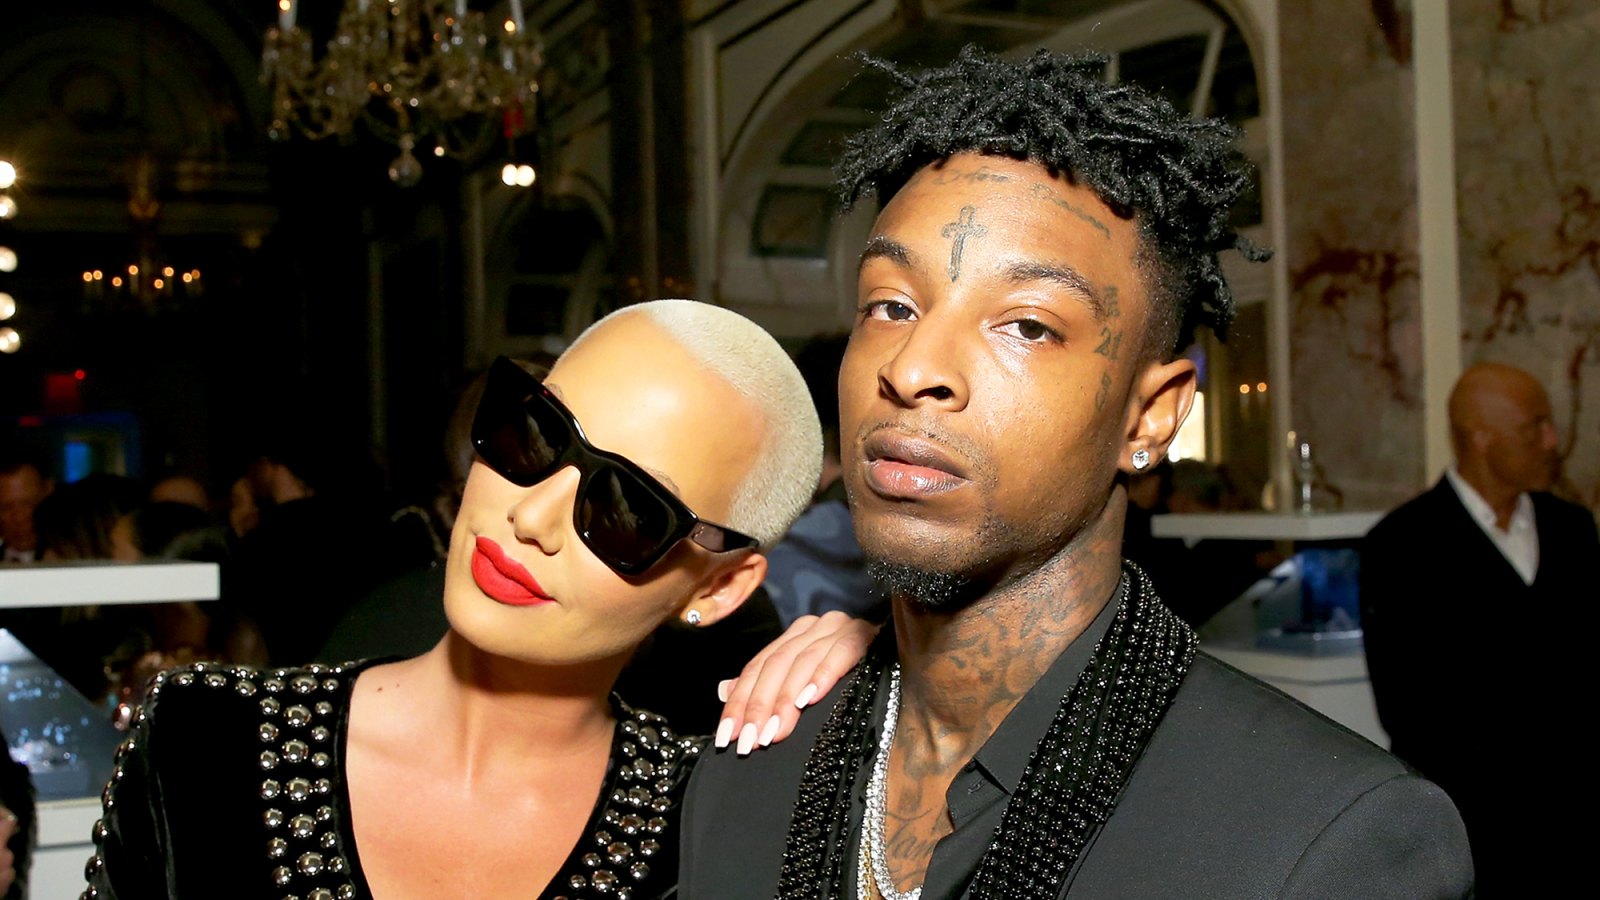 Amber Rose and 21 Savage attend Harper's BAZAAR 2017 Celebration of "ICONS By Carine Roitfeld" at The Plaza Hotel in New York City